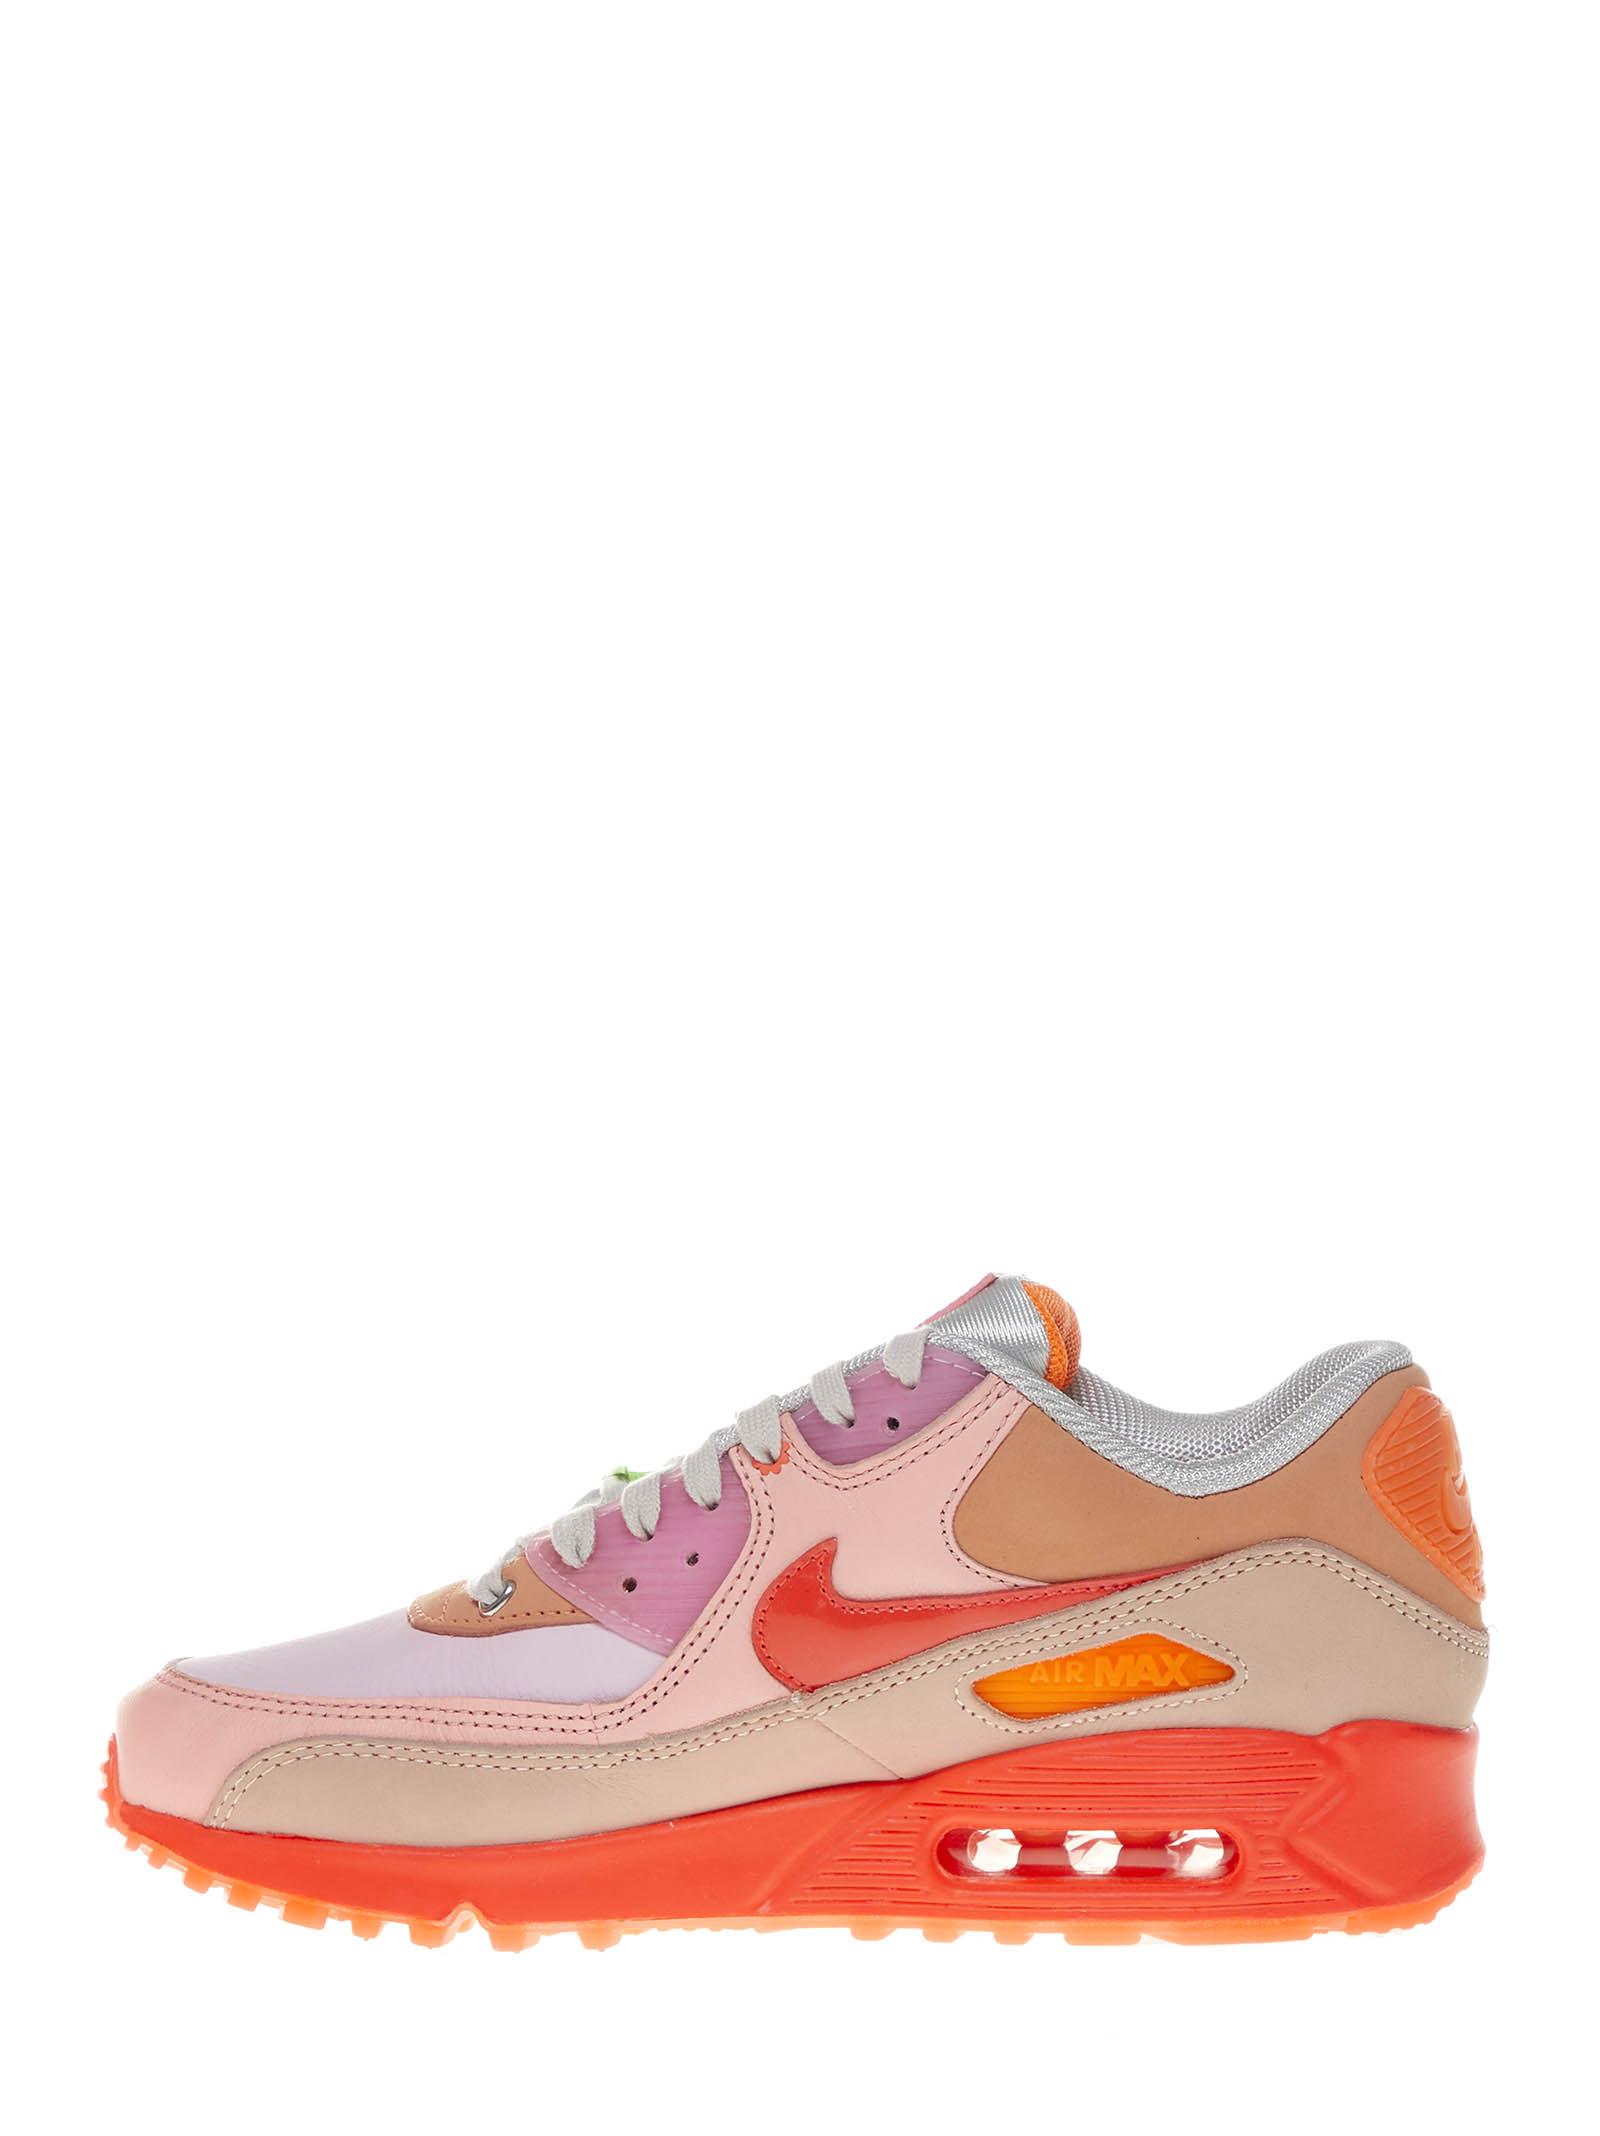 Instrument Eksisterer Frivillig Nike Pink And Orange Air Max 90 Sneakers With Layered Design And Integrated  Air Technology. | Lyst